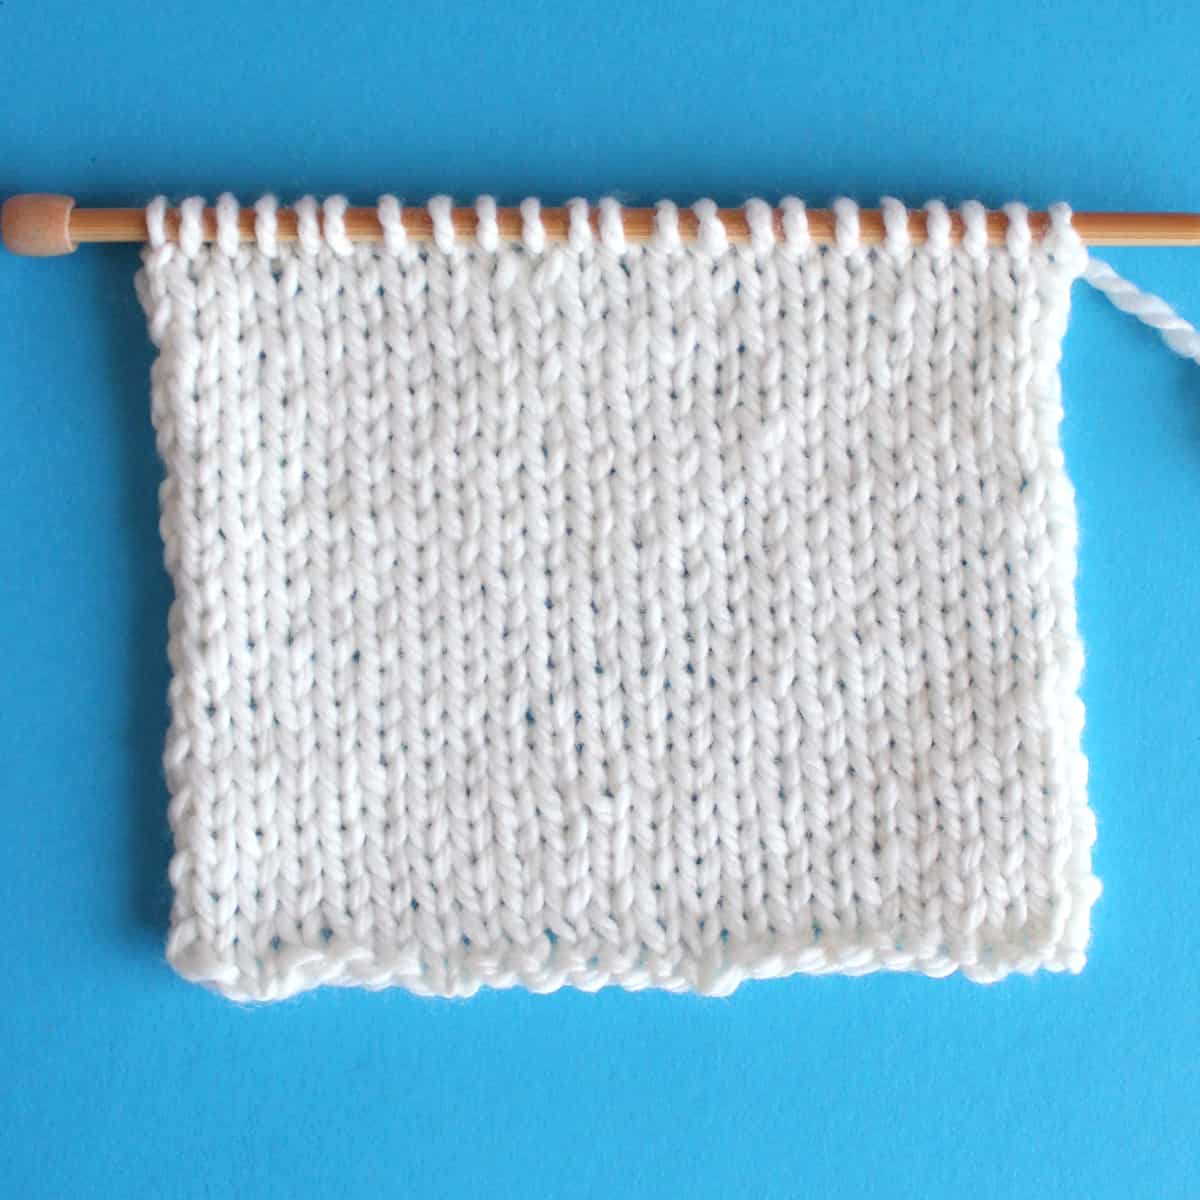 Stockinette stitch knitted flat on straight knitting needles in white color yarn.